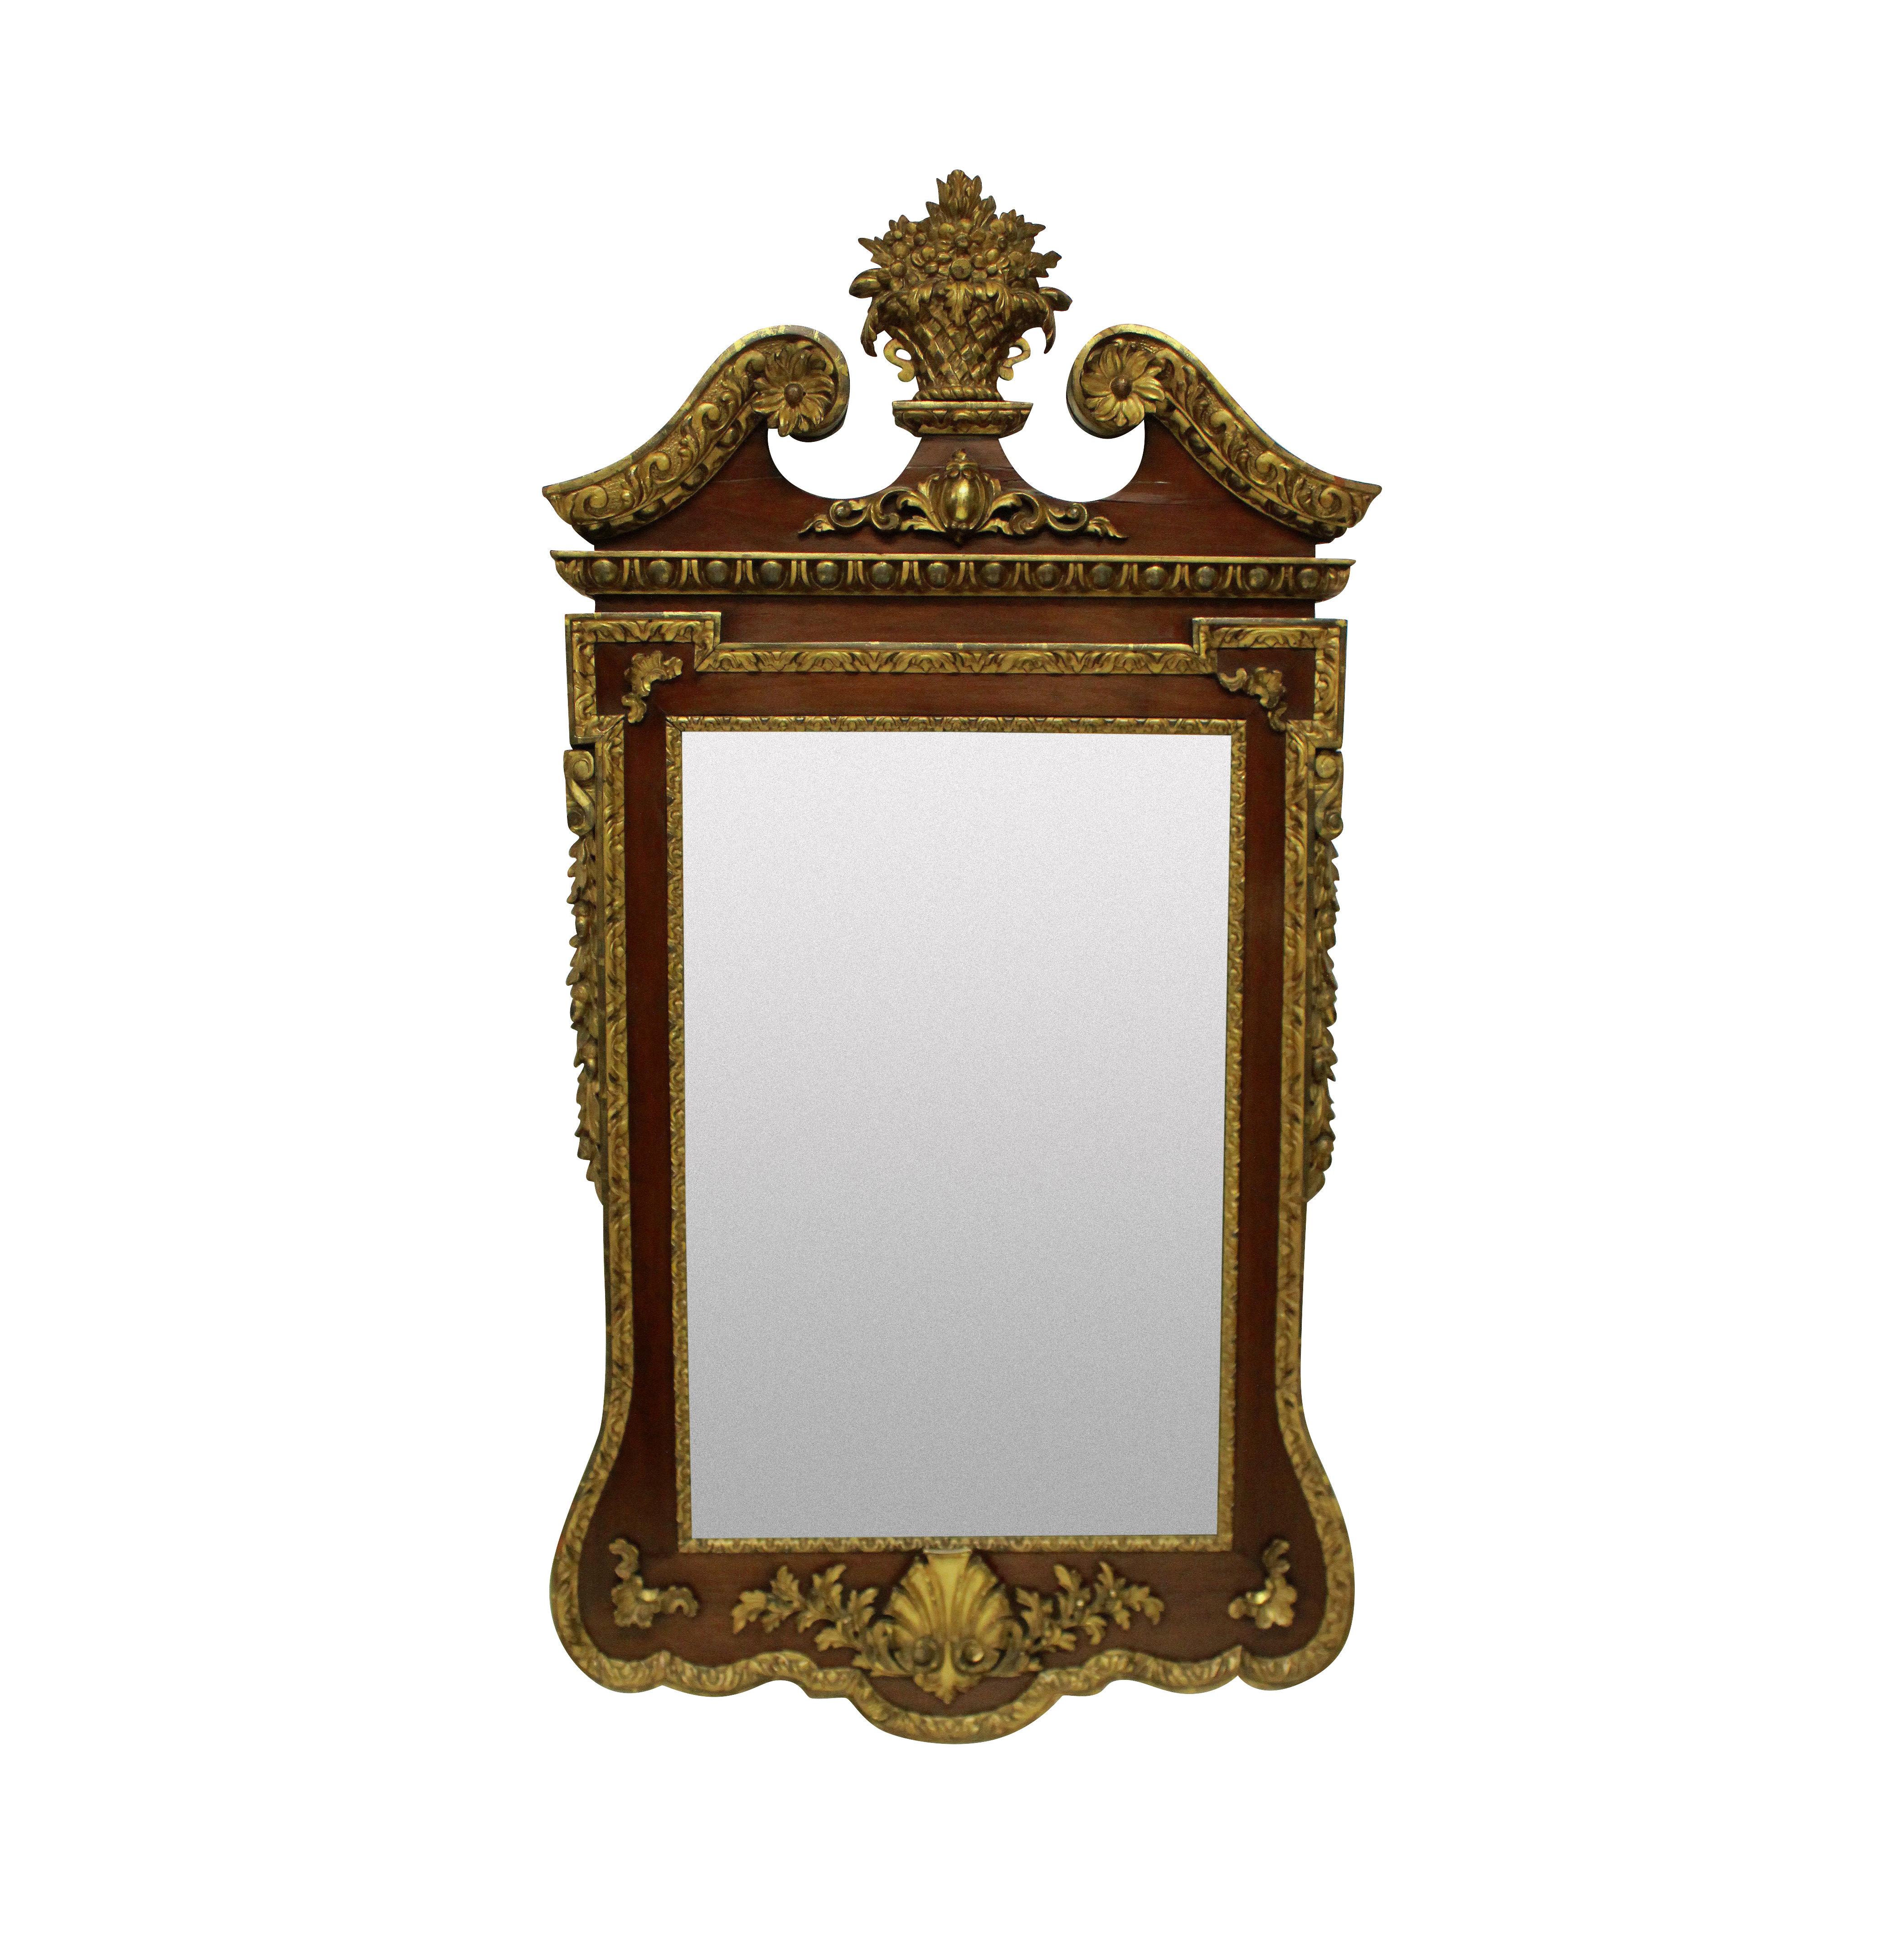 A large and finely carved walnut and parcel-gilt George II style mirror with a beveled plate.